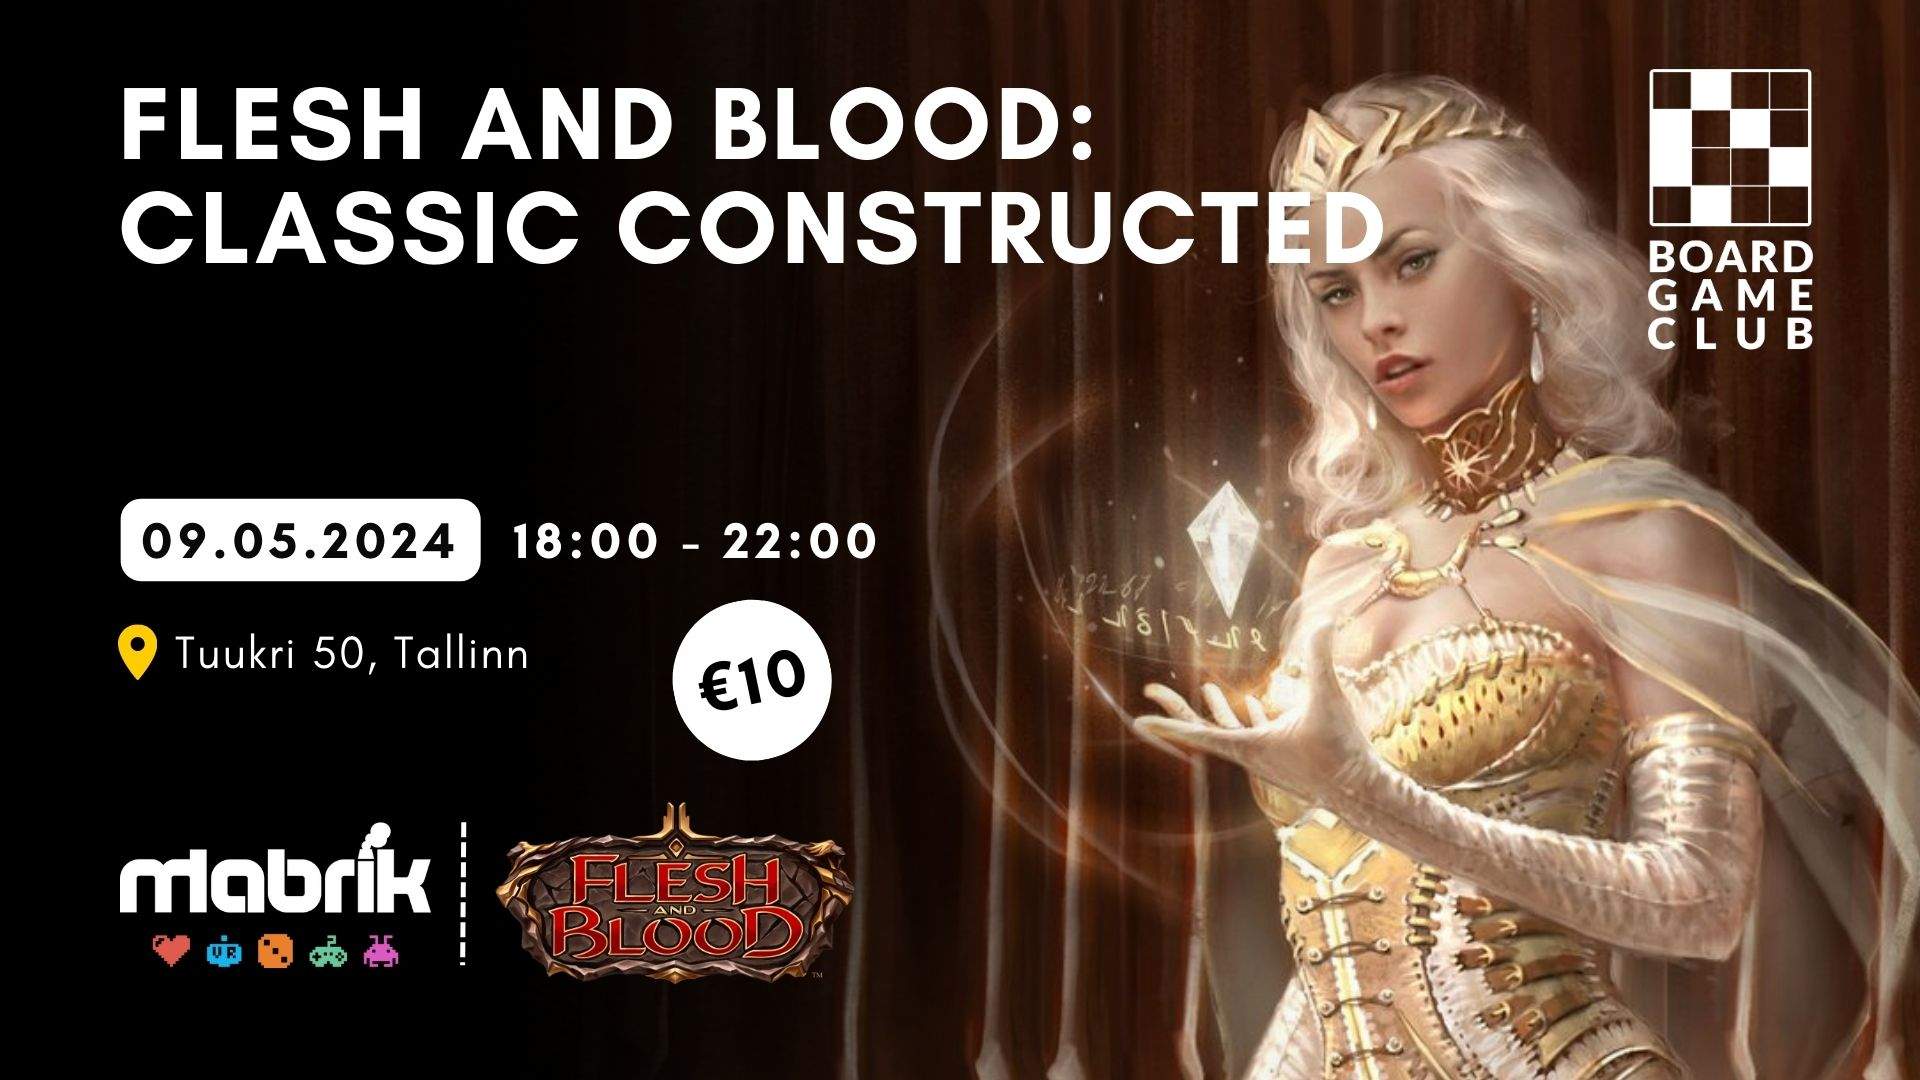 Events - 09.05.2024 - Flesh & Blood - Classic Constructed